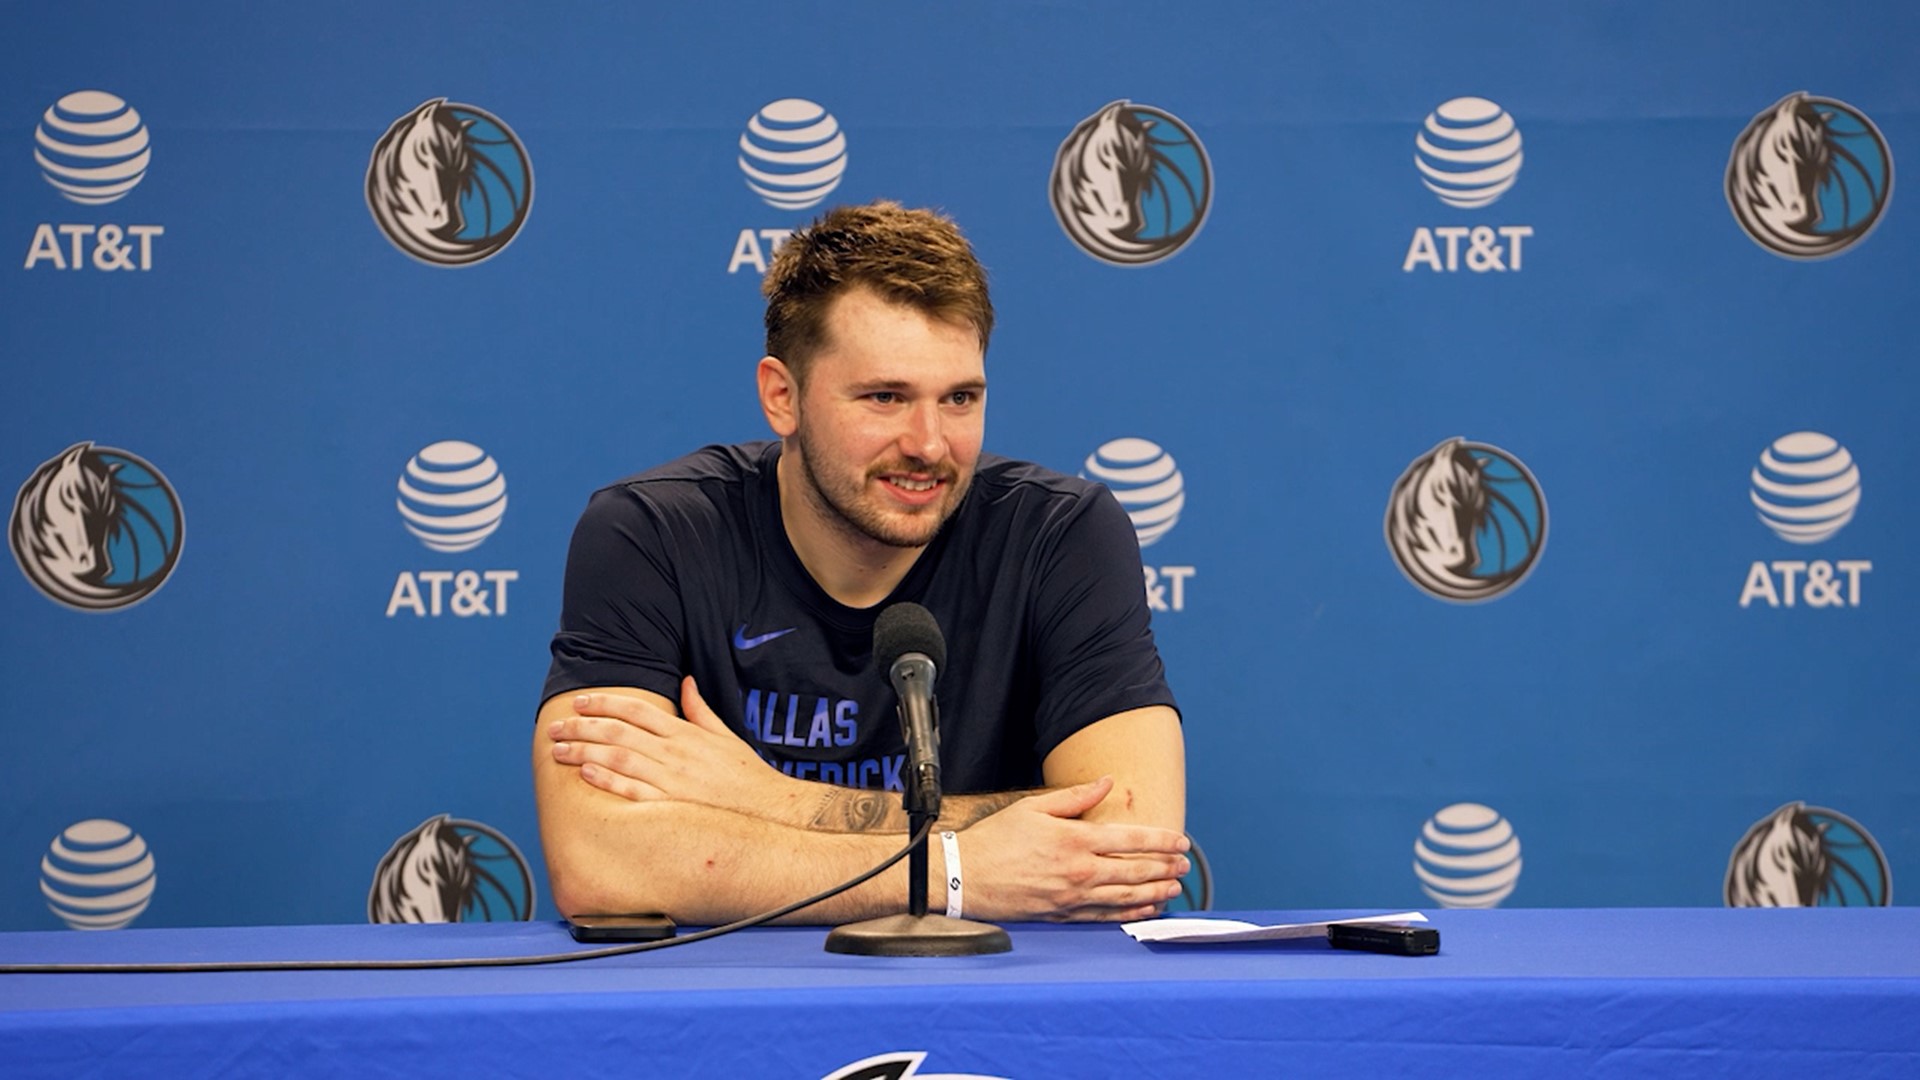 Luka Doncic scored 49 points and had a tiebreaking 3-pointer with 26 seconds remaining on a right-handed heave that banked in as the Mavericks beat the Nets 125-120.